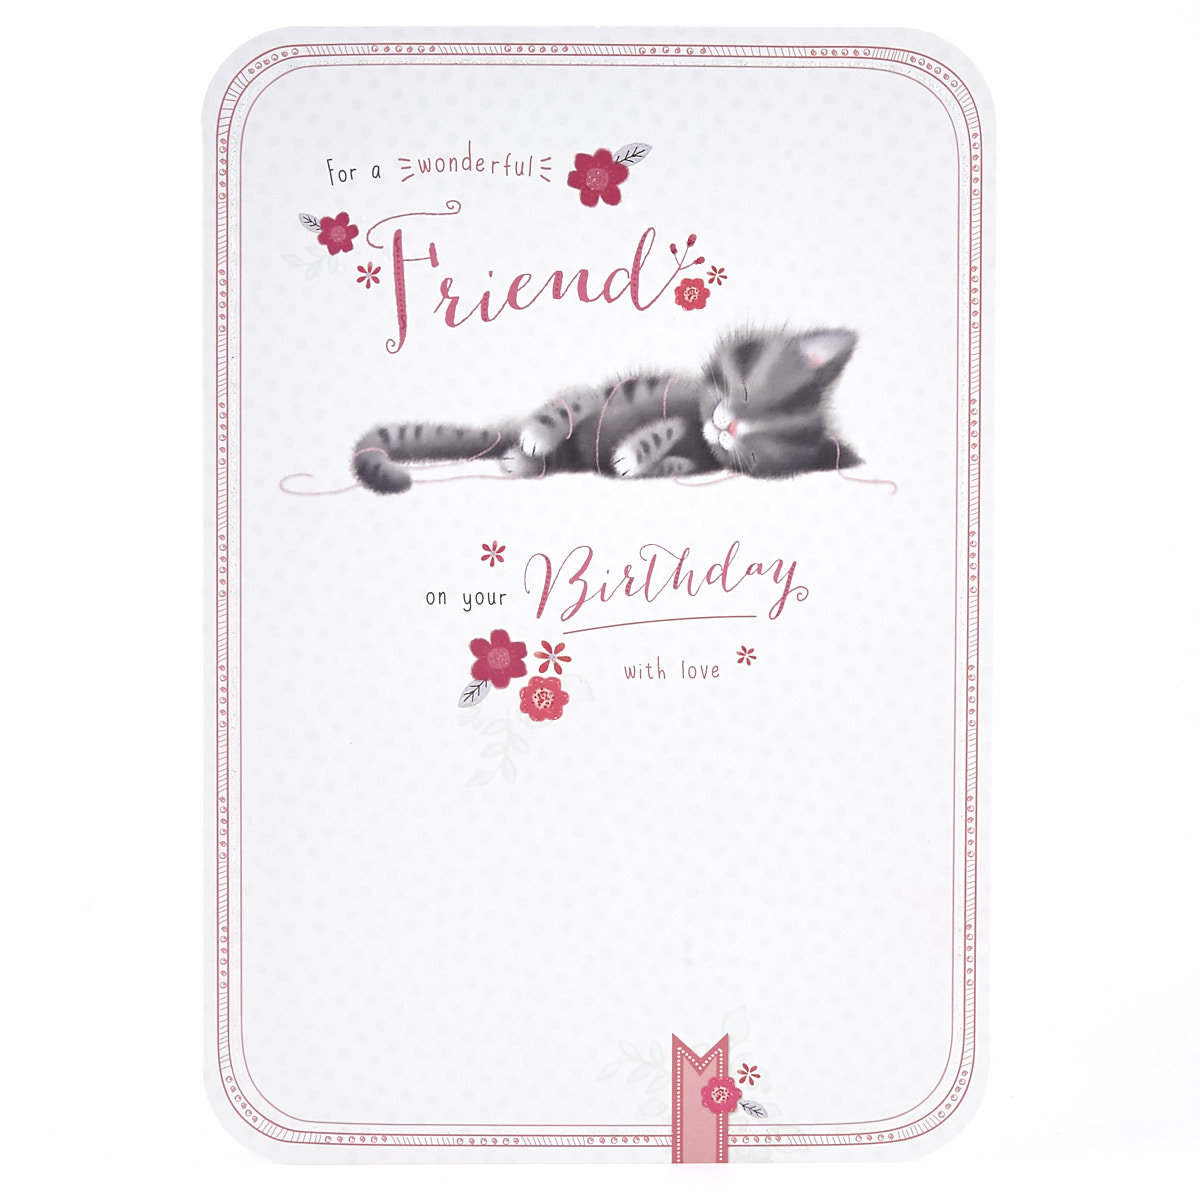 Birthday Card - Kitten Playing With String